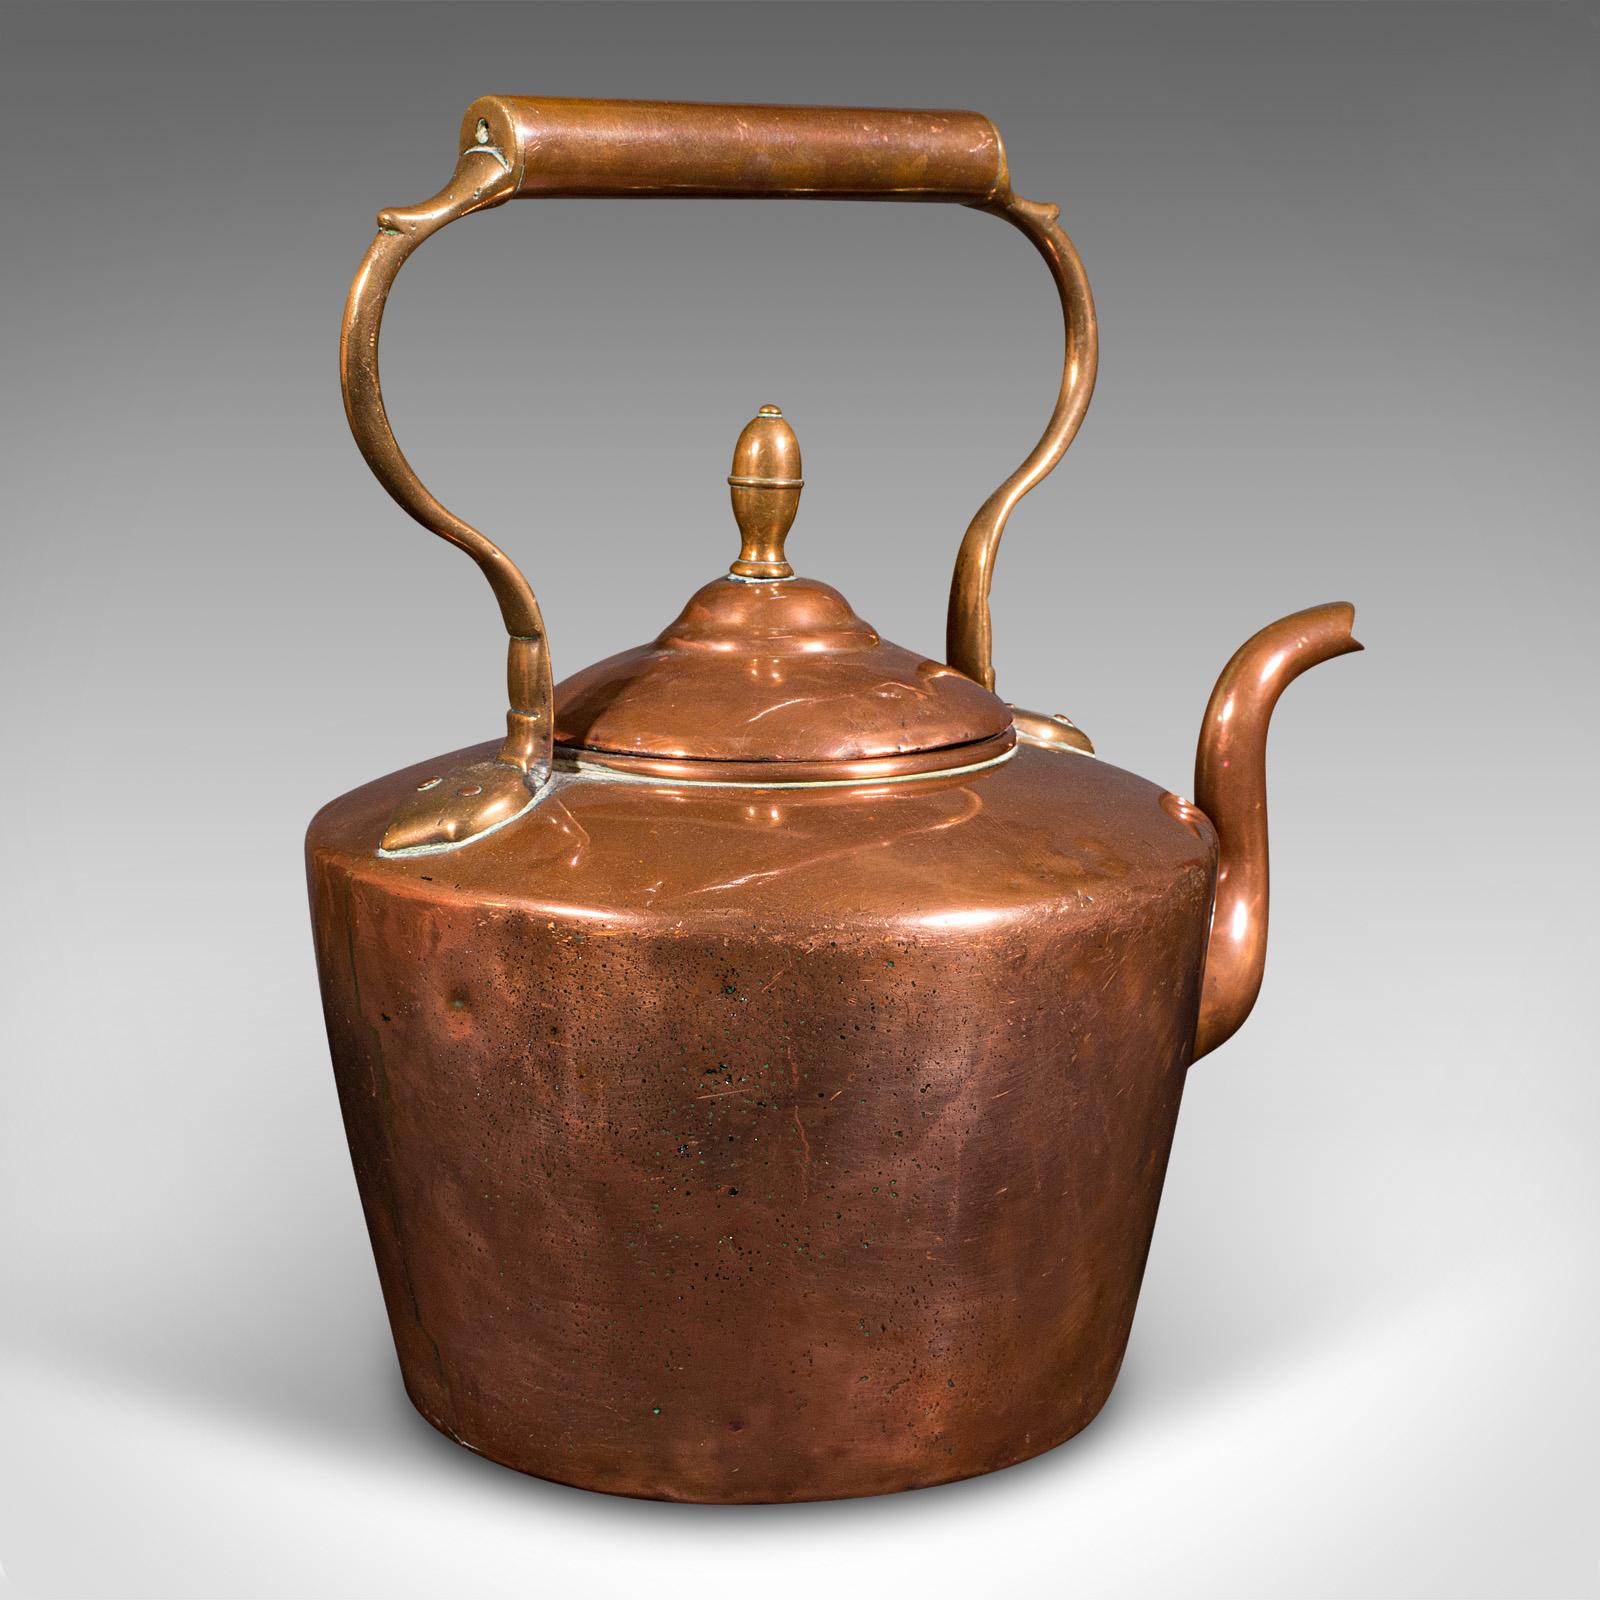 Late Victorian Antique Fireside Kettle, English Copper, Decorative, Fireplace Teapot, Victorian For Sale